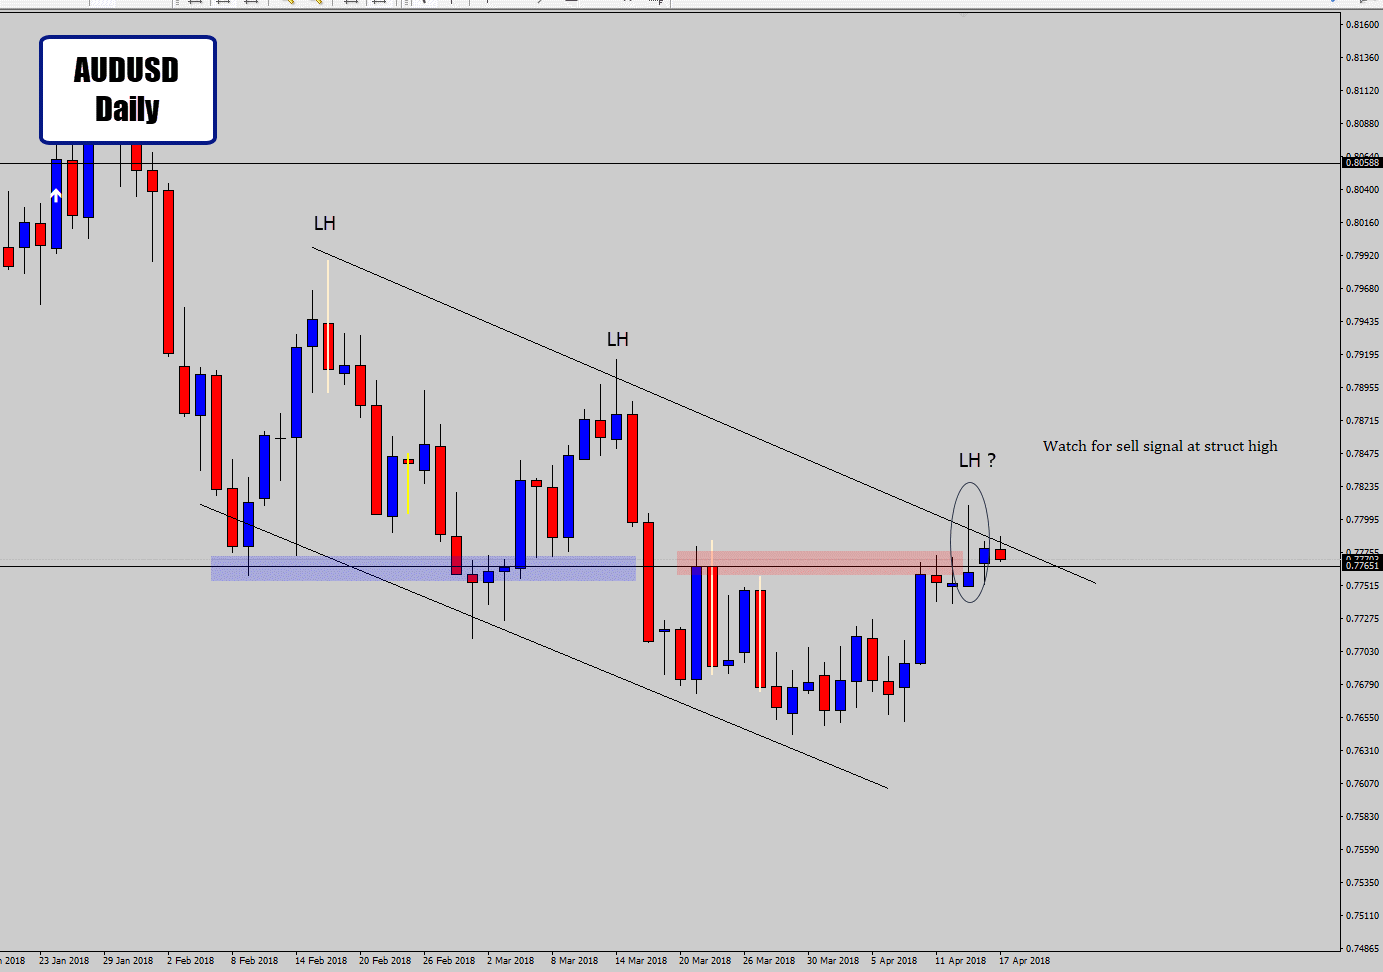 rejection off channel top in audusd